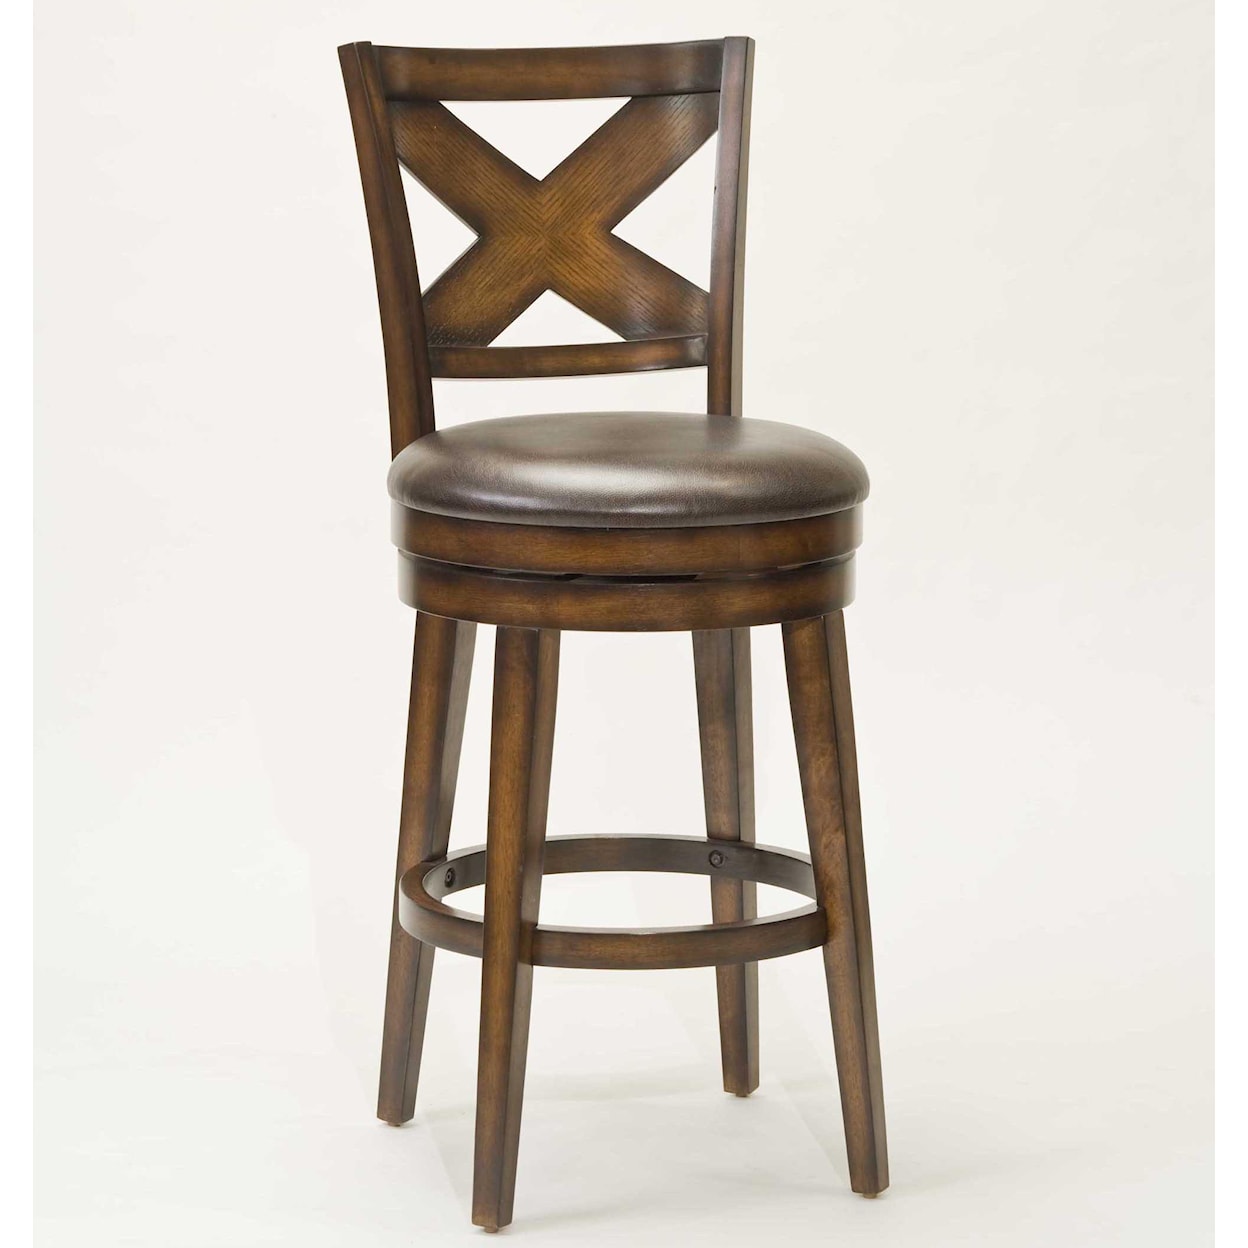 Hillsdale Wood Stools 26" Counter Height Sunhill Swivel Stool